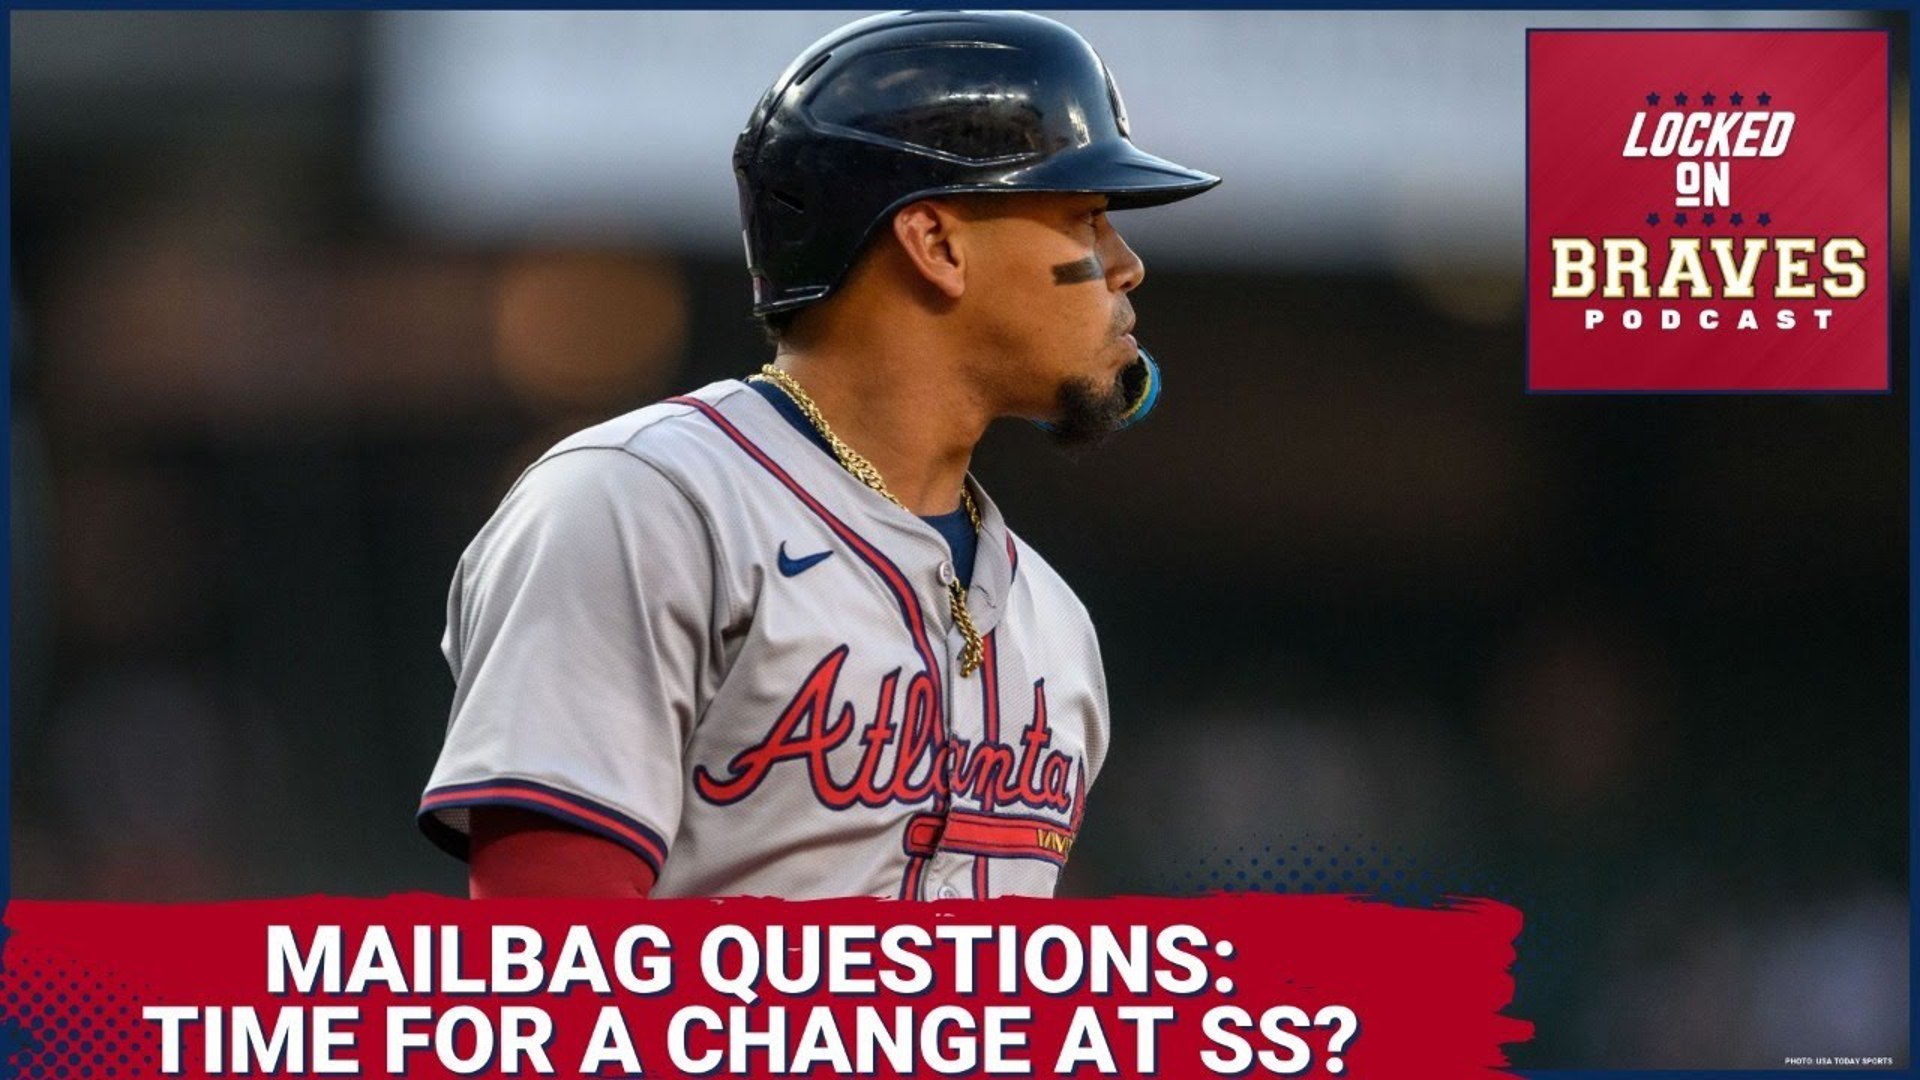 A lot of Atlanta Braves fans want a little more offense from Orlando Arcia. Will the Braves look for an upgrade at the shortstop position?